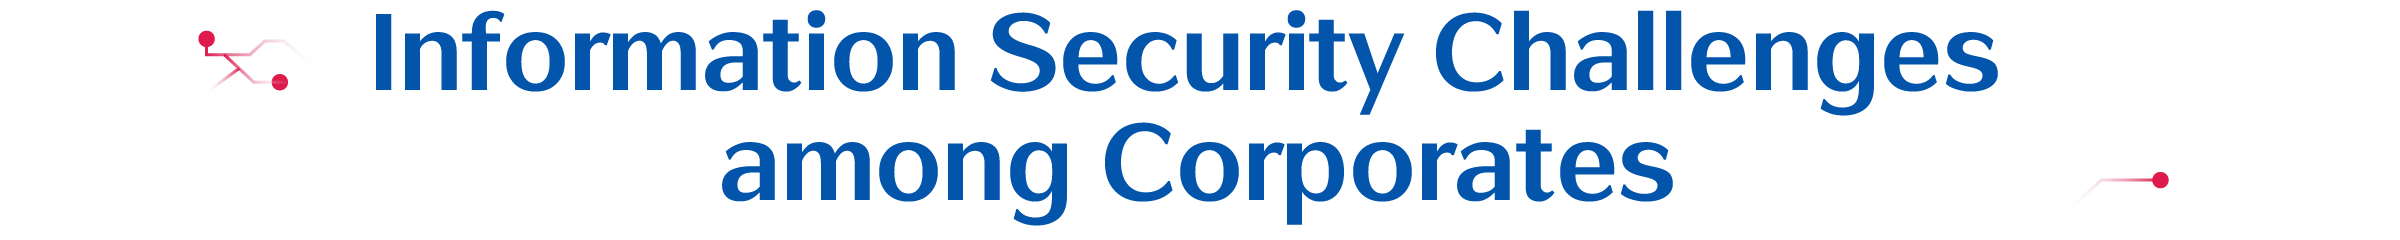 Information Security Challenges among Corporates